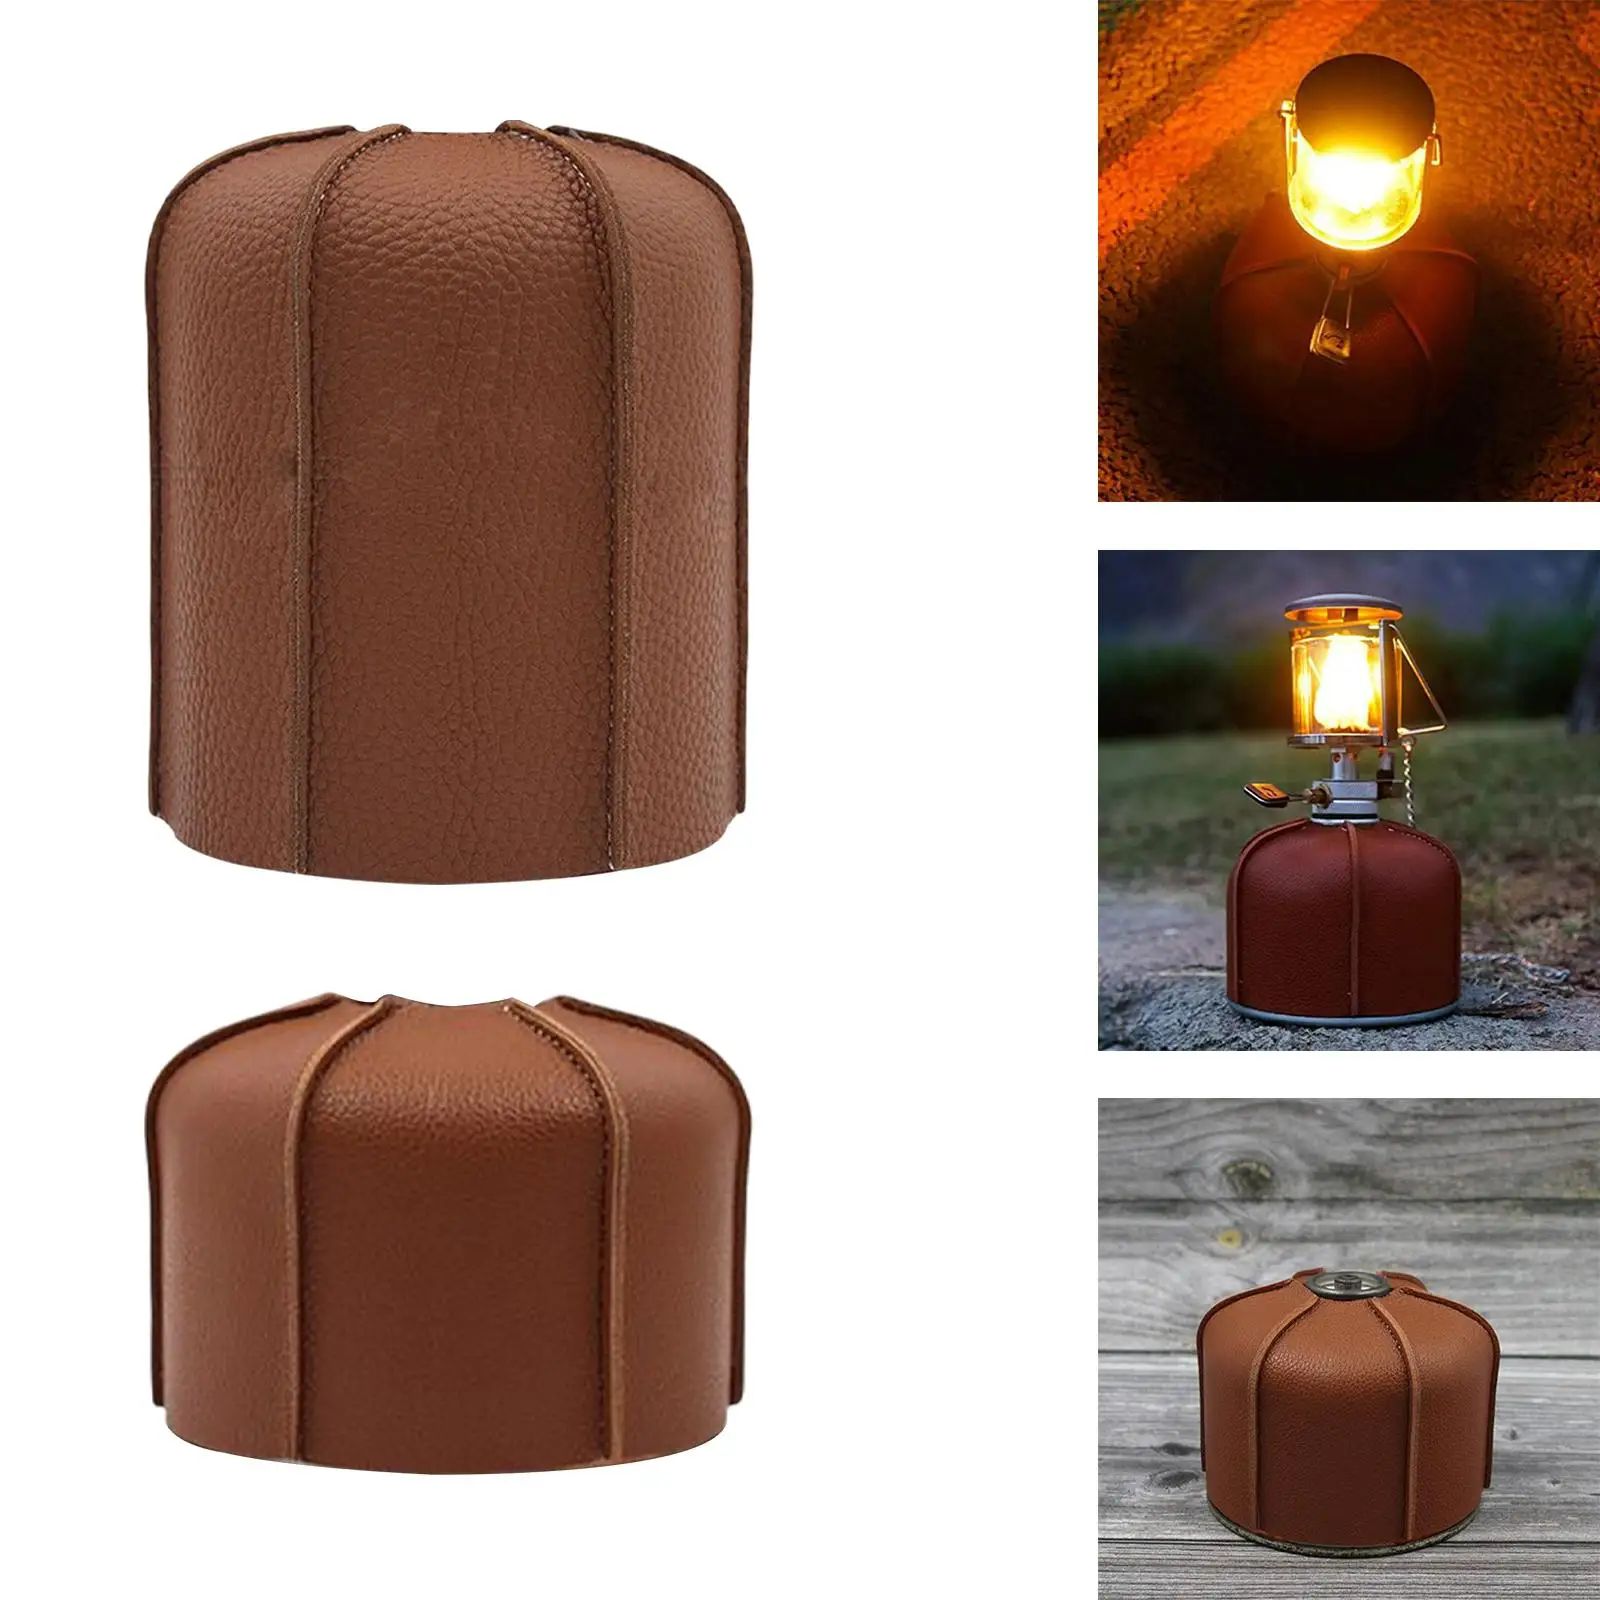 PU Leather Gas Canister Cover Gas Cylinder Tank Cover Protector for Hiking BBQ